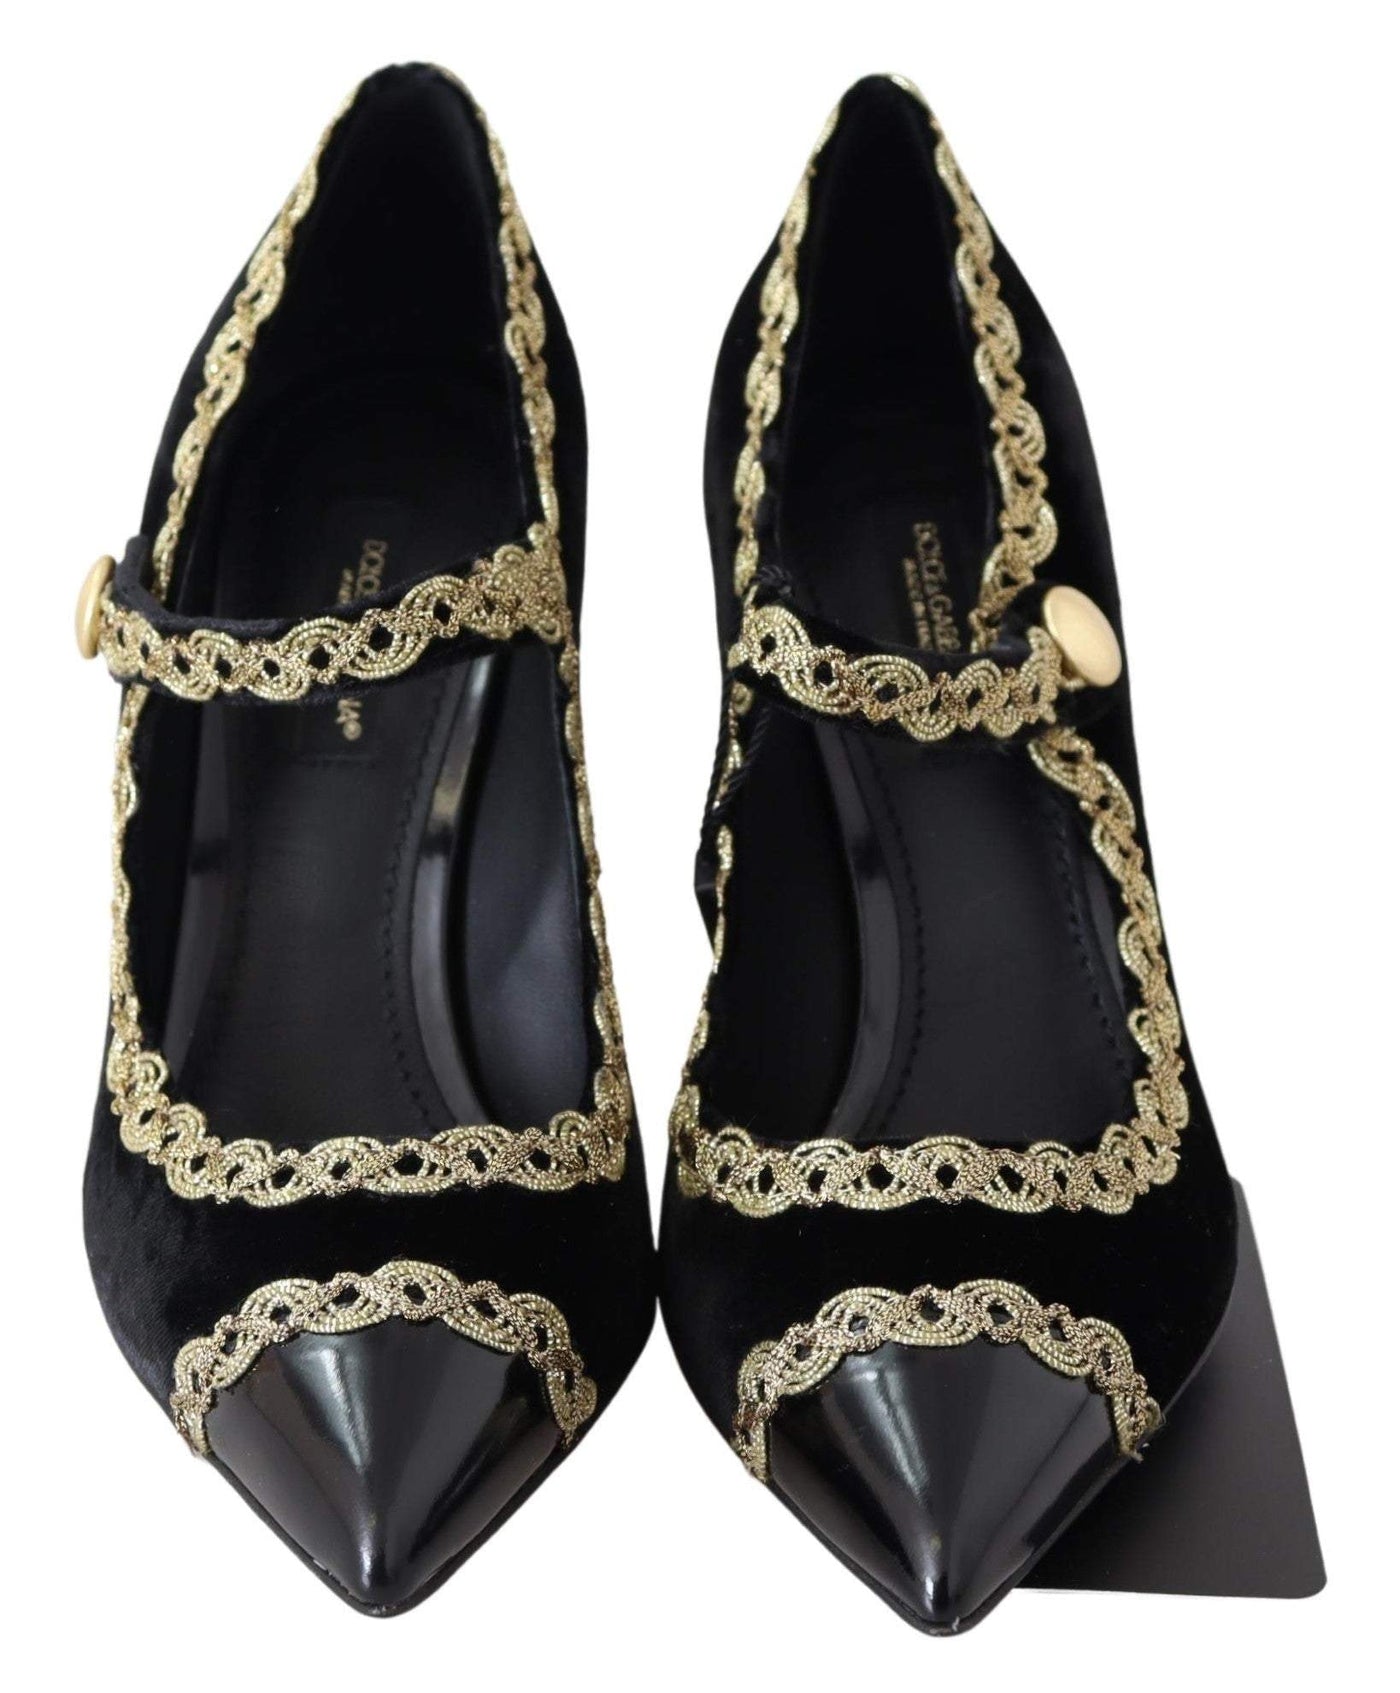 Dolce & Gabbana Black Velvet Gold Mary Janes Pumps #women, Black, Dolce & Gabbana, EU35/US4.5, feed-agegroup-adult, feed-color-Black, feed-gender-female, Pumps - Women - Shoes, Shoes - New Arrivals at SEYMAYKA